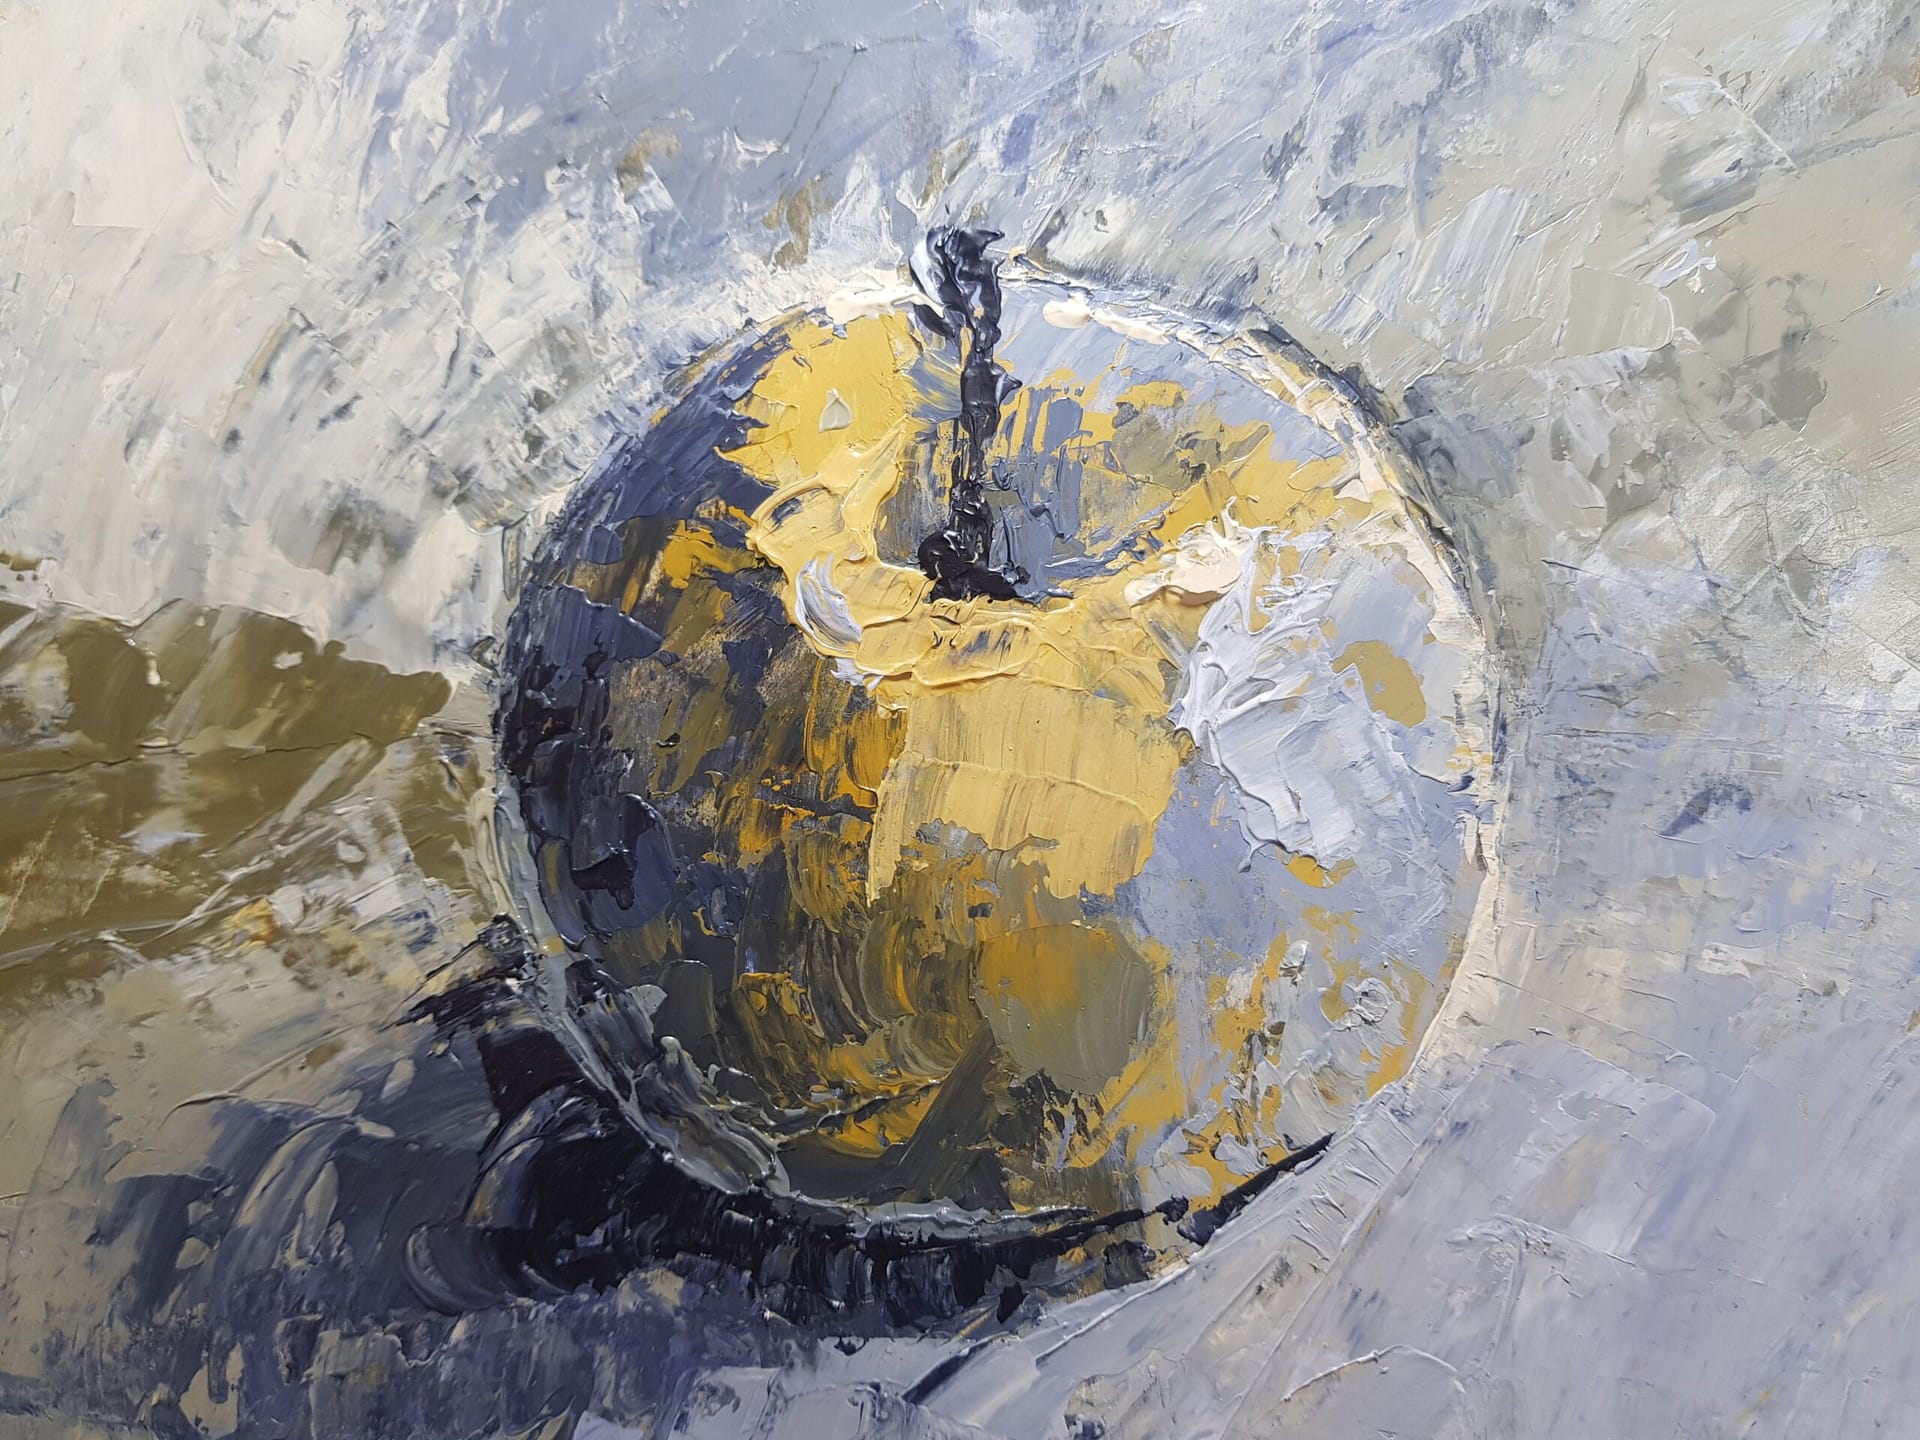 Palette Knife Painting Example from LifeArt School and Academy